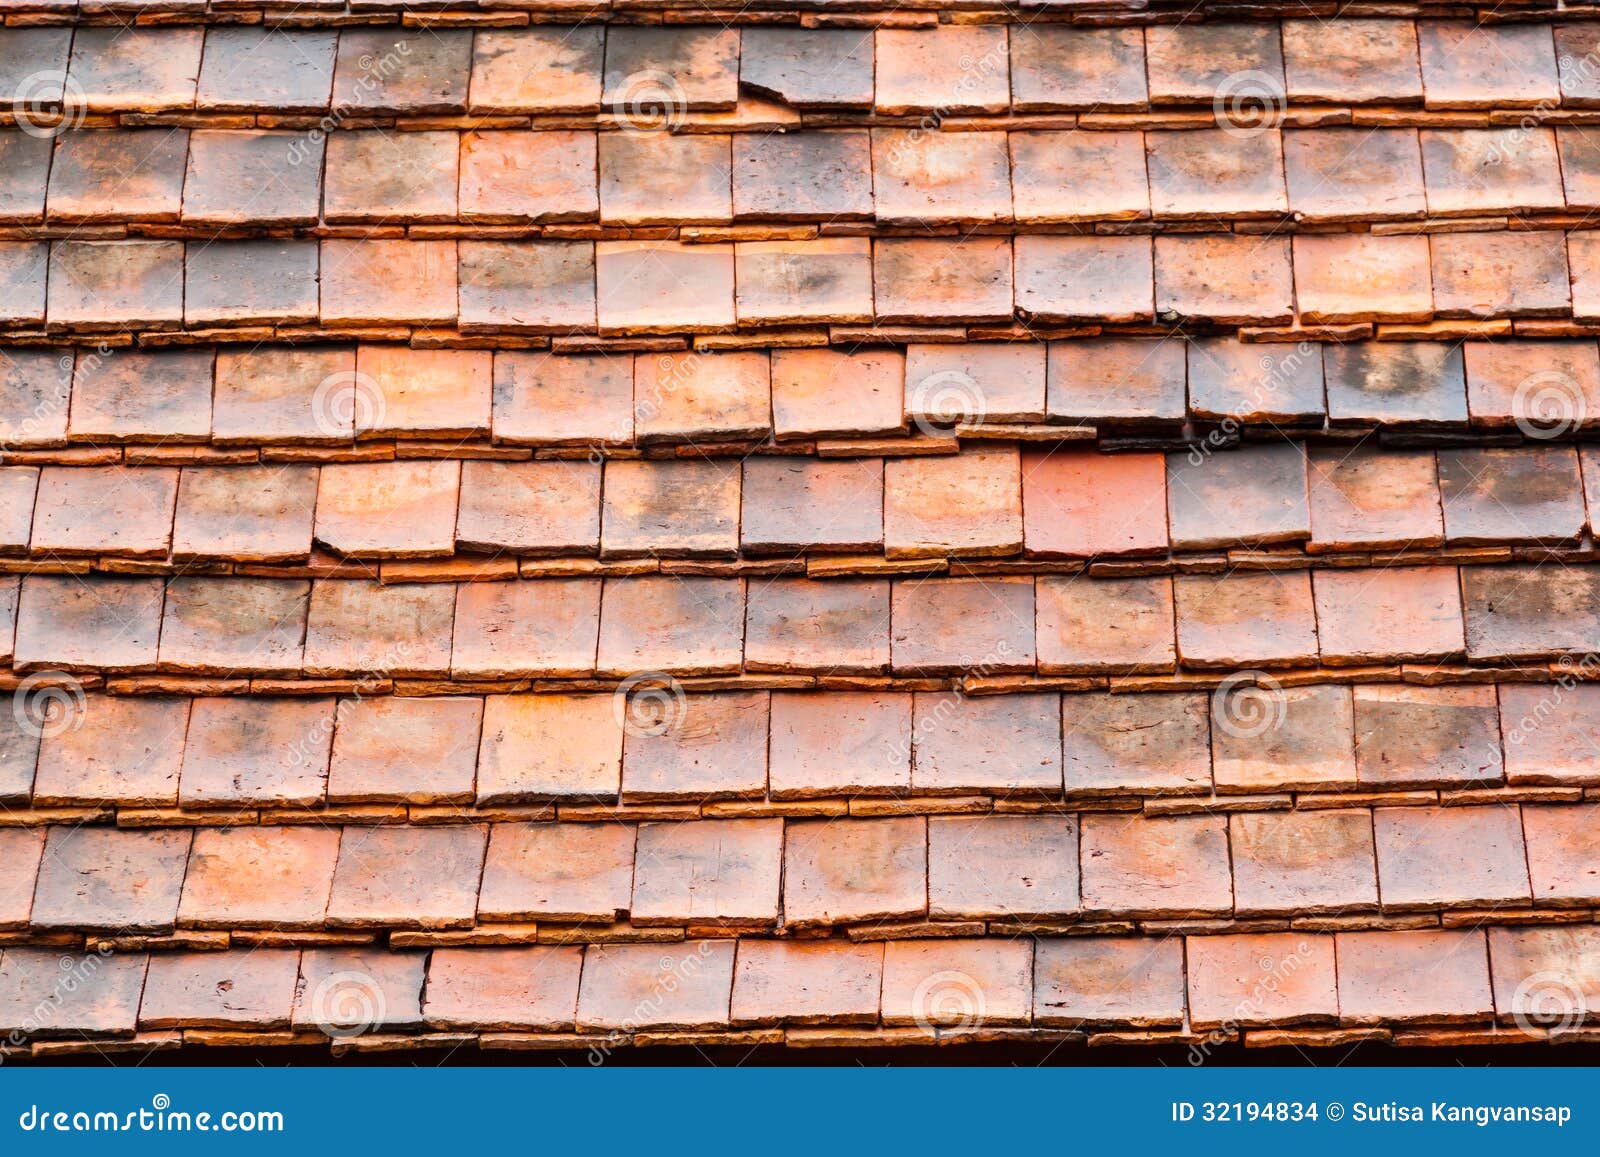 Old style red tile roof stock photo. Image of protection - 32194834